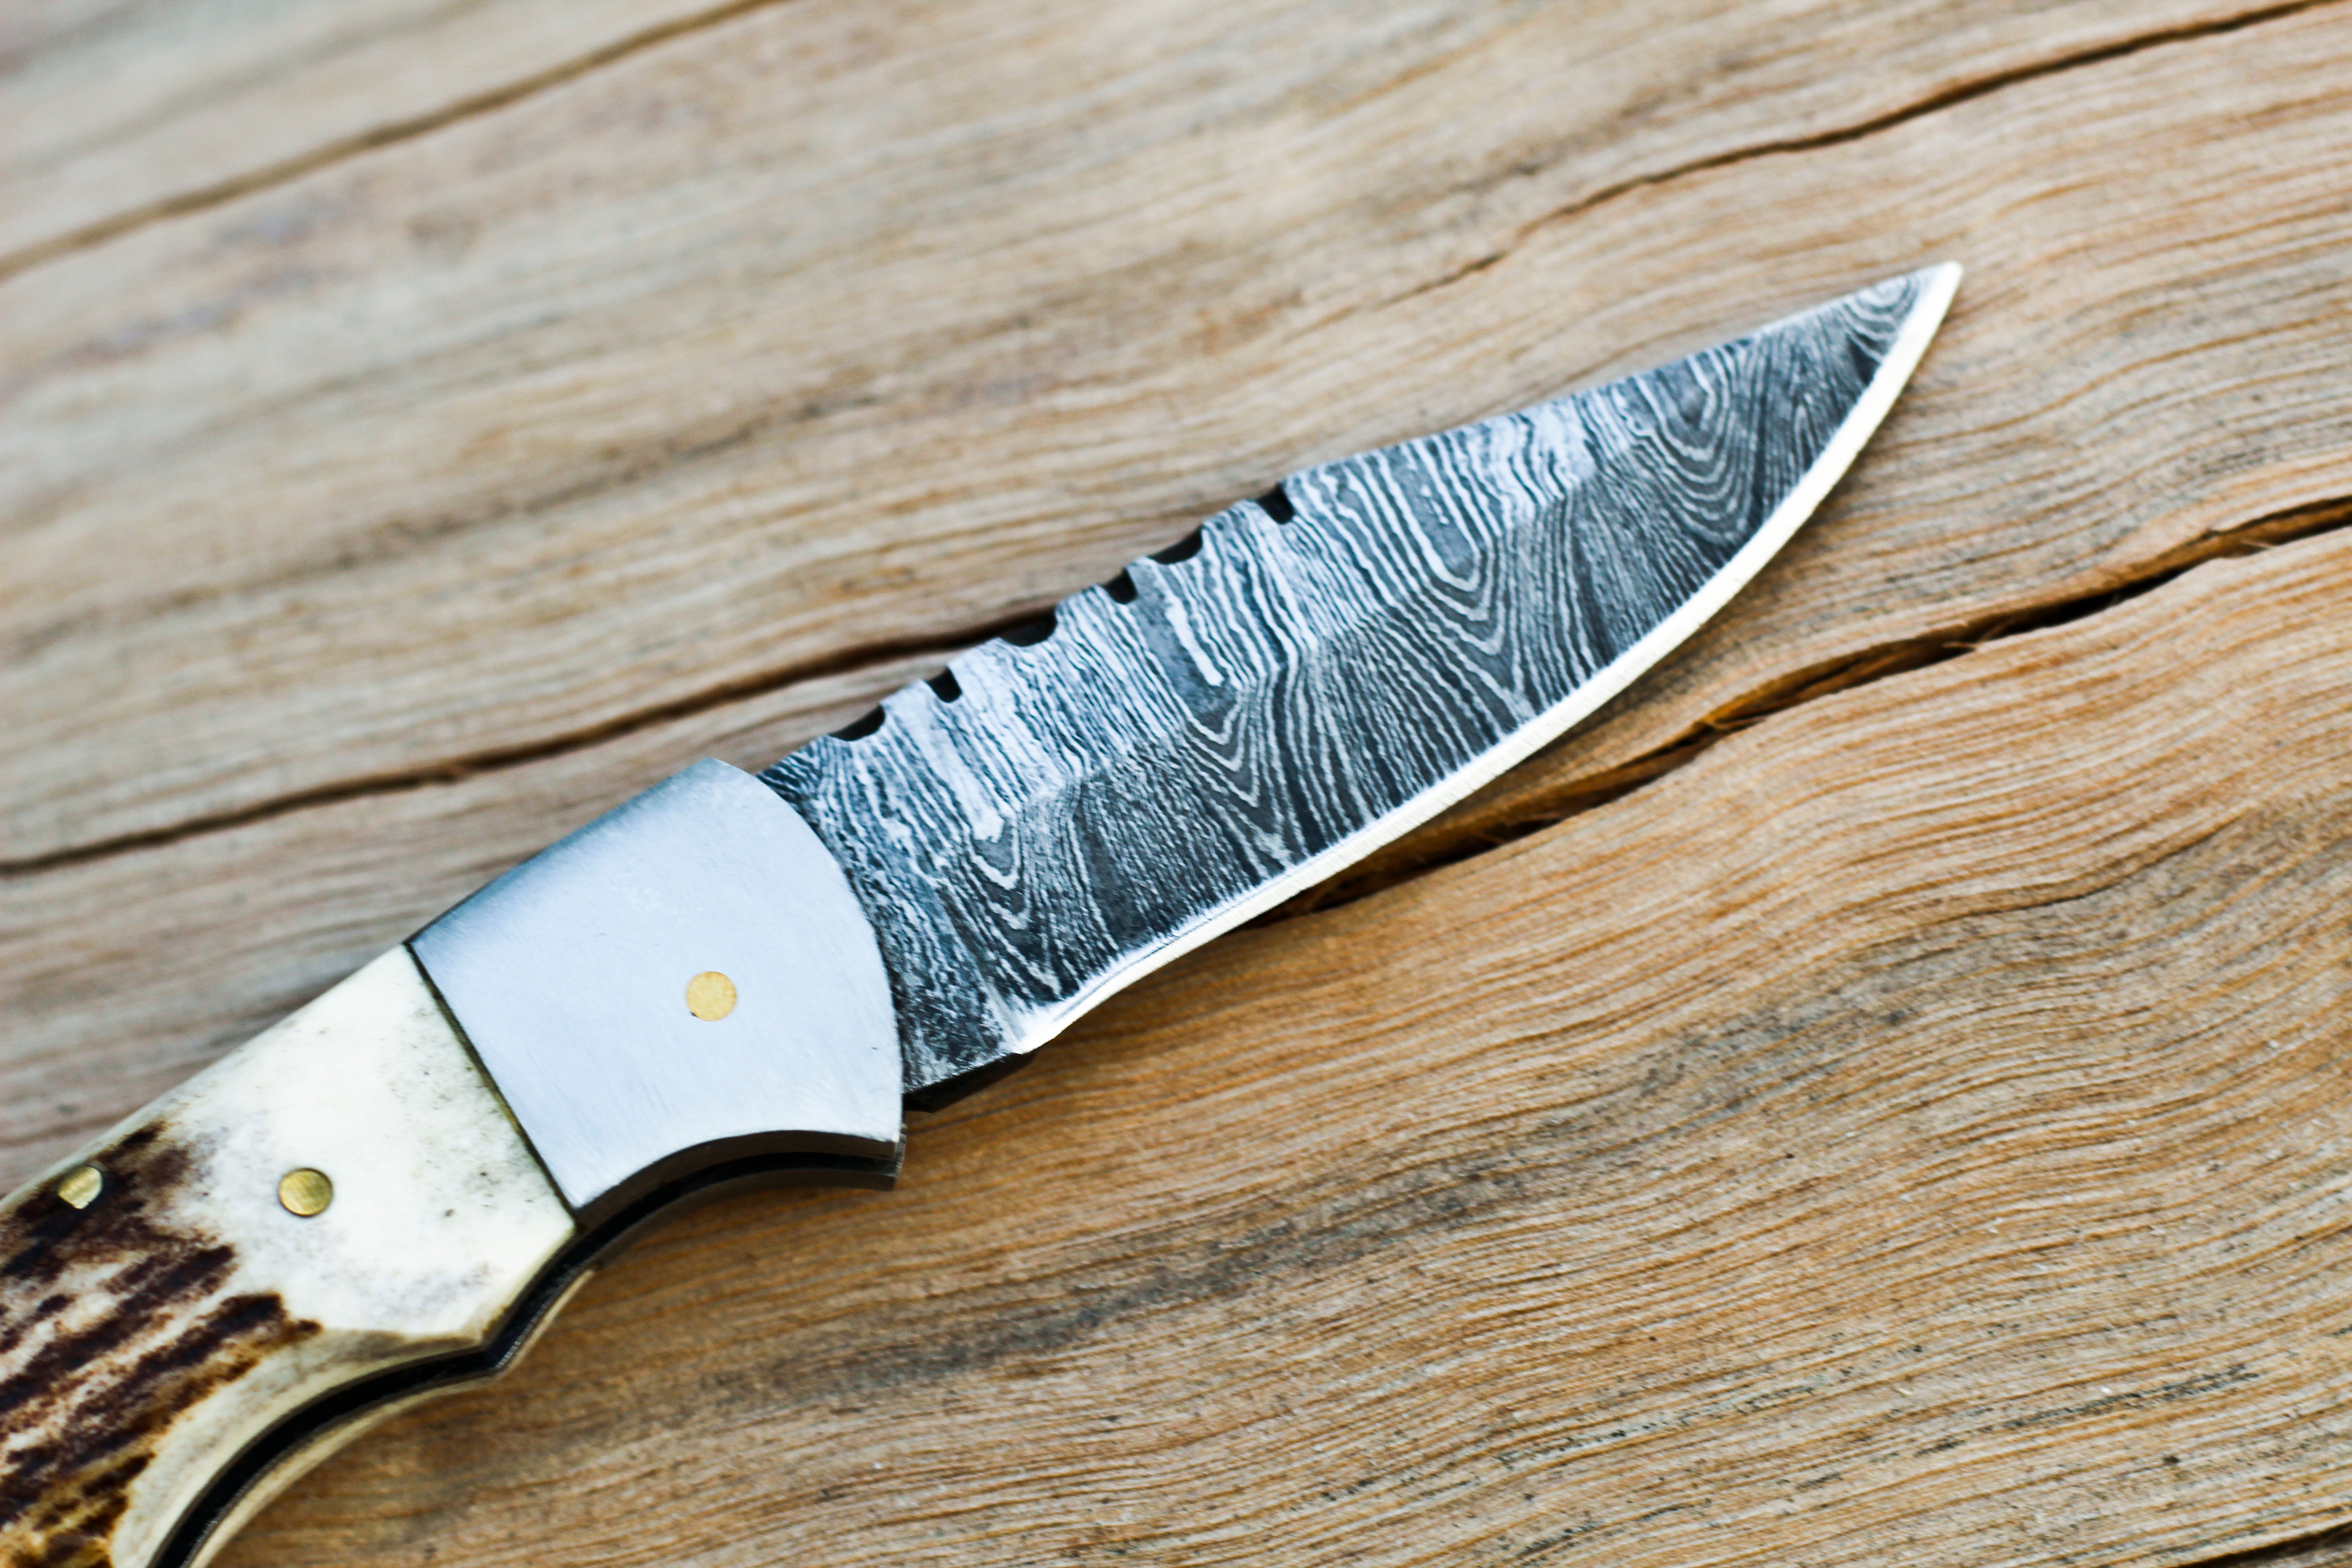 <h3>Handmade Forged Damascus Steel Hunting Folding Camping Pocket Knife With Stag Antler Camel Bone _ Steel Bolster Handle</h3>